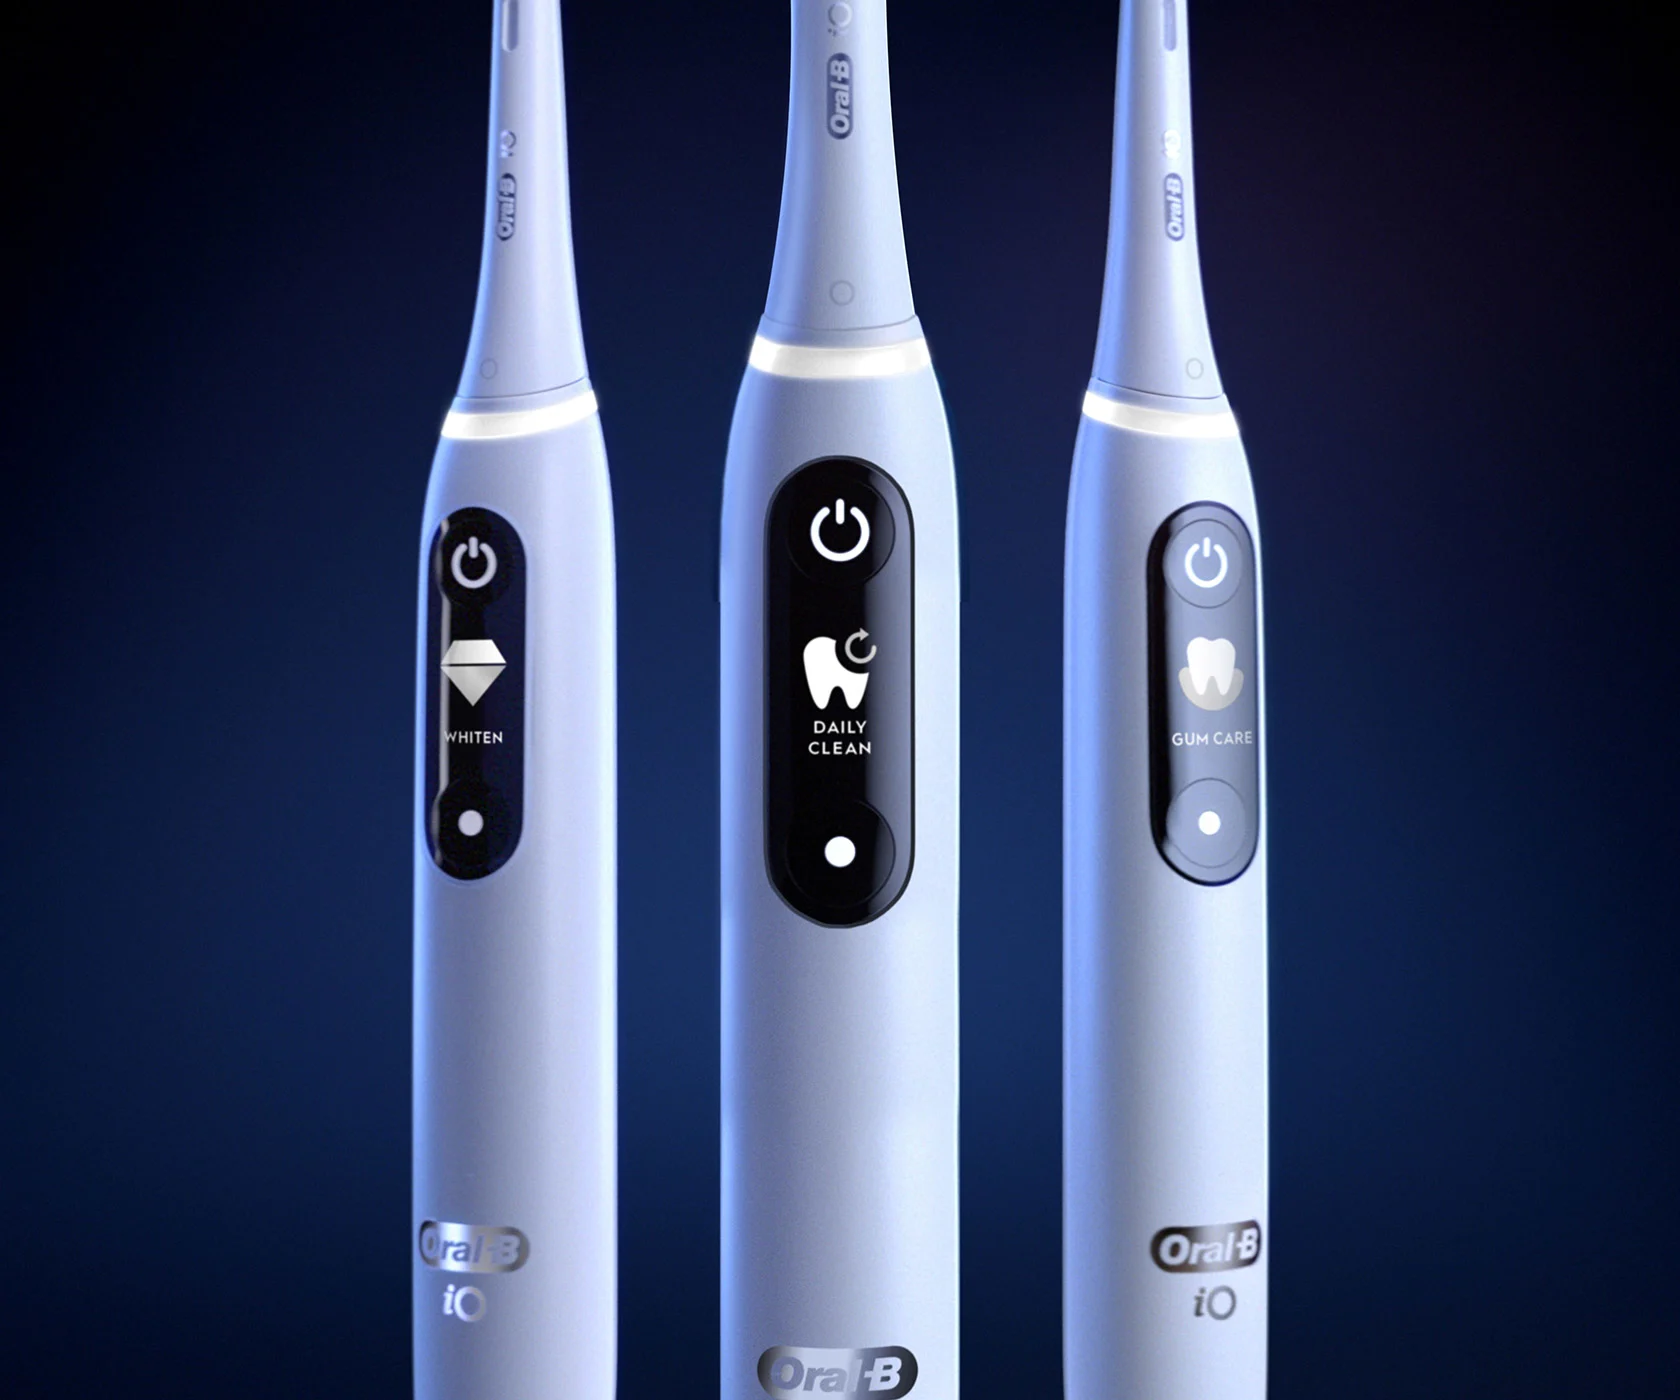 Trio of Oral-B iO Series 7 toothbrushes with different cleaning modes displayed undefined